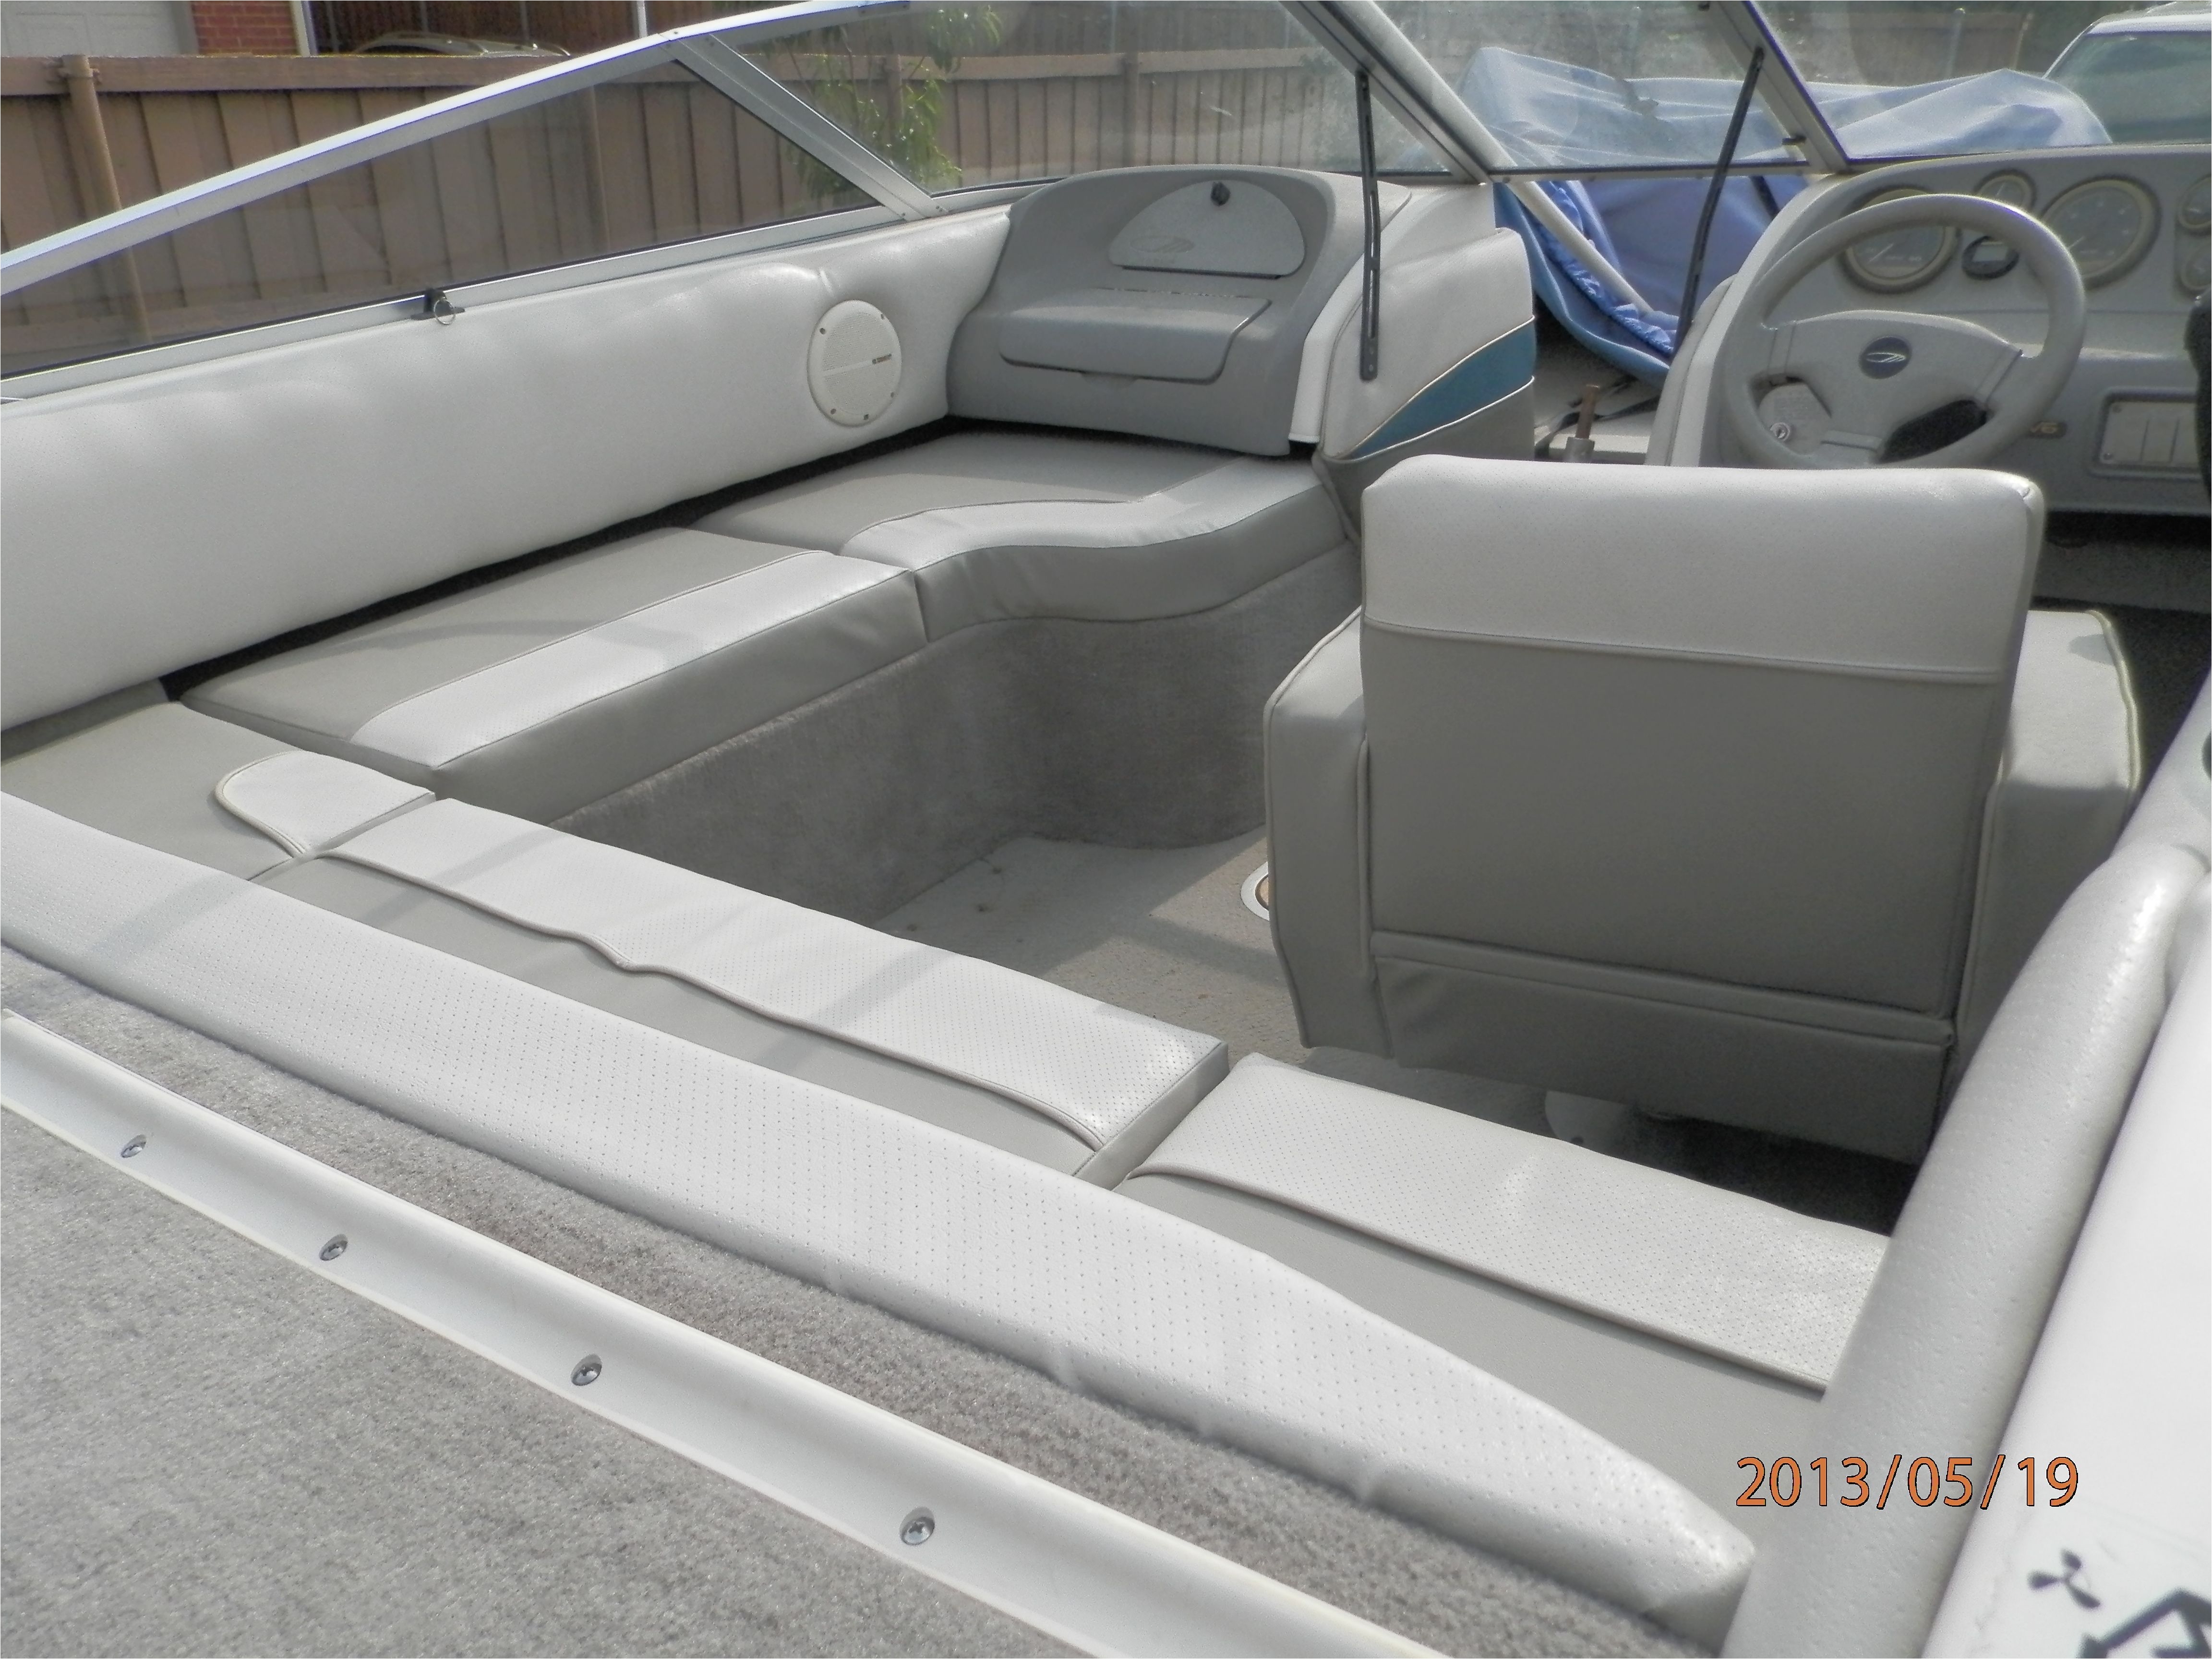 redesigned the old 1995 boat from 2 seats and a bench to wrap around seating with